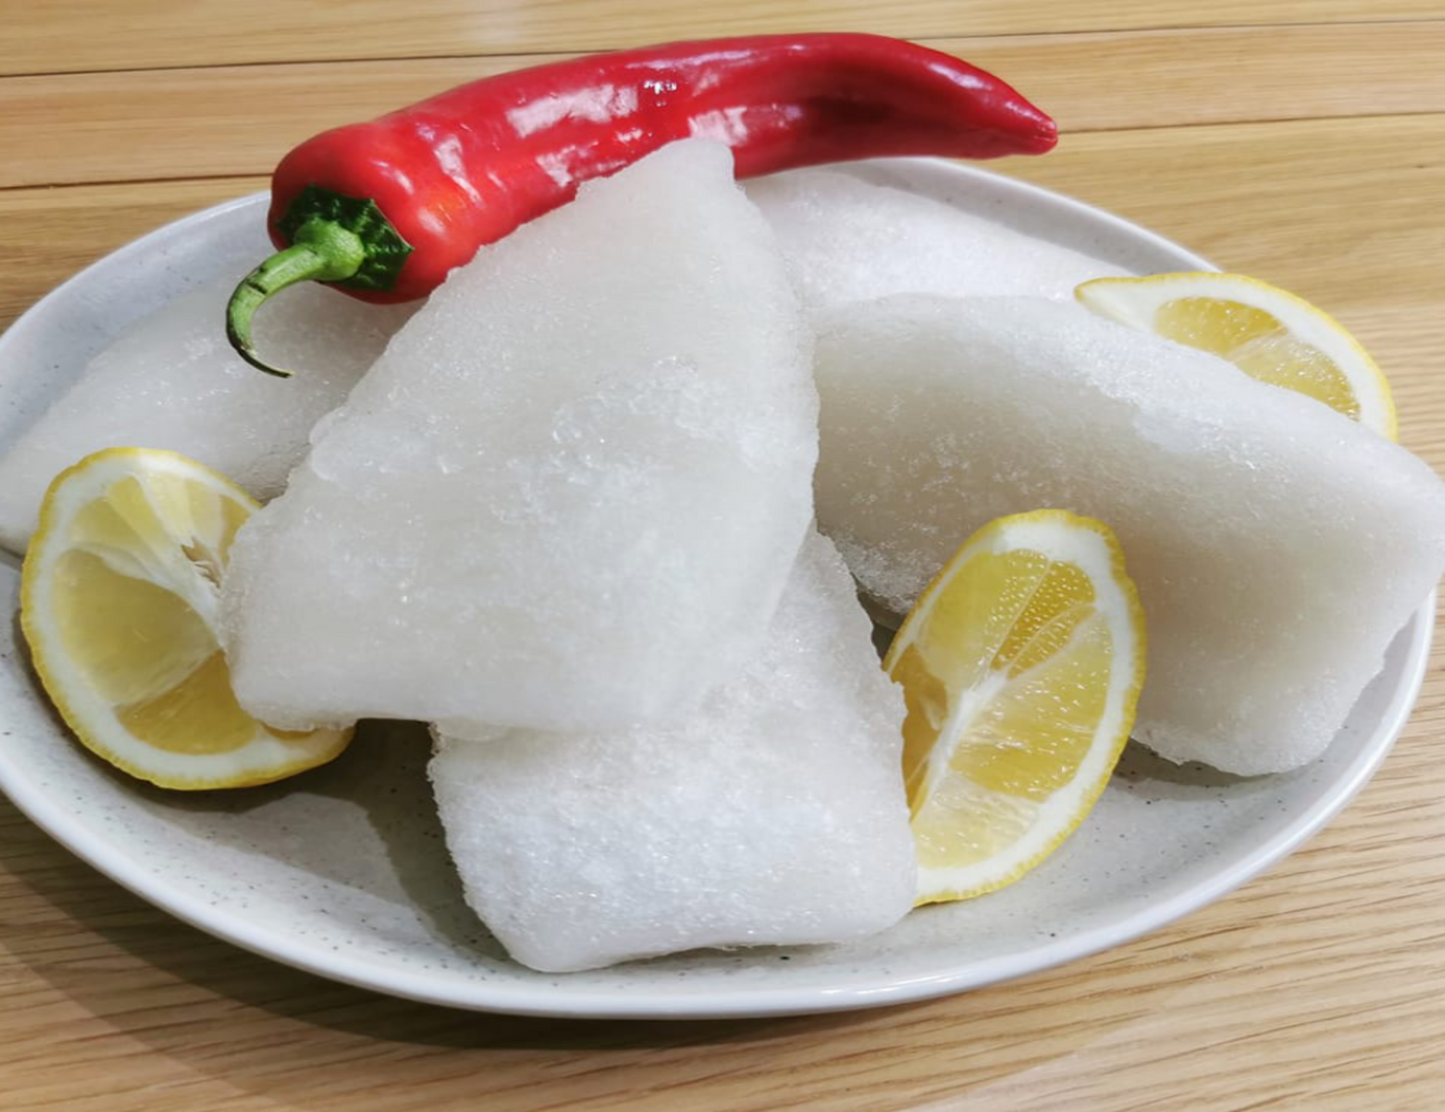 Frozen Squid. We deliver to Bristol, Somerset, Bath, Weston Super Mare, Taunton, Newport, North Somerset, and Gloucestershire. Order your fish and meat with us today, order online or by phone.